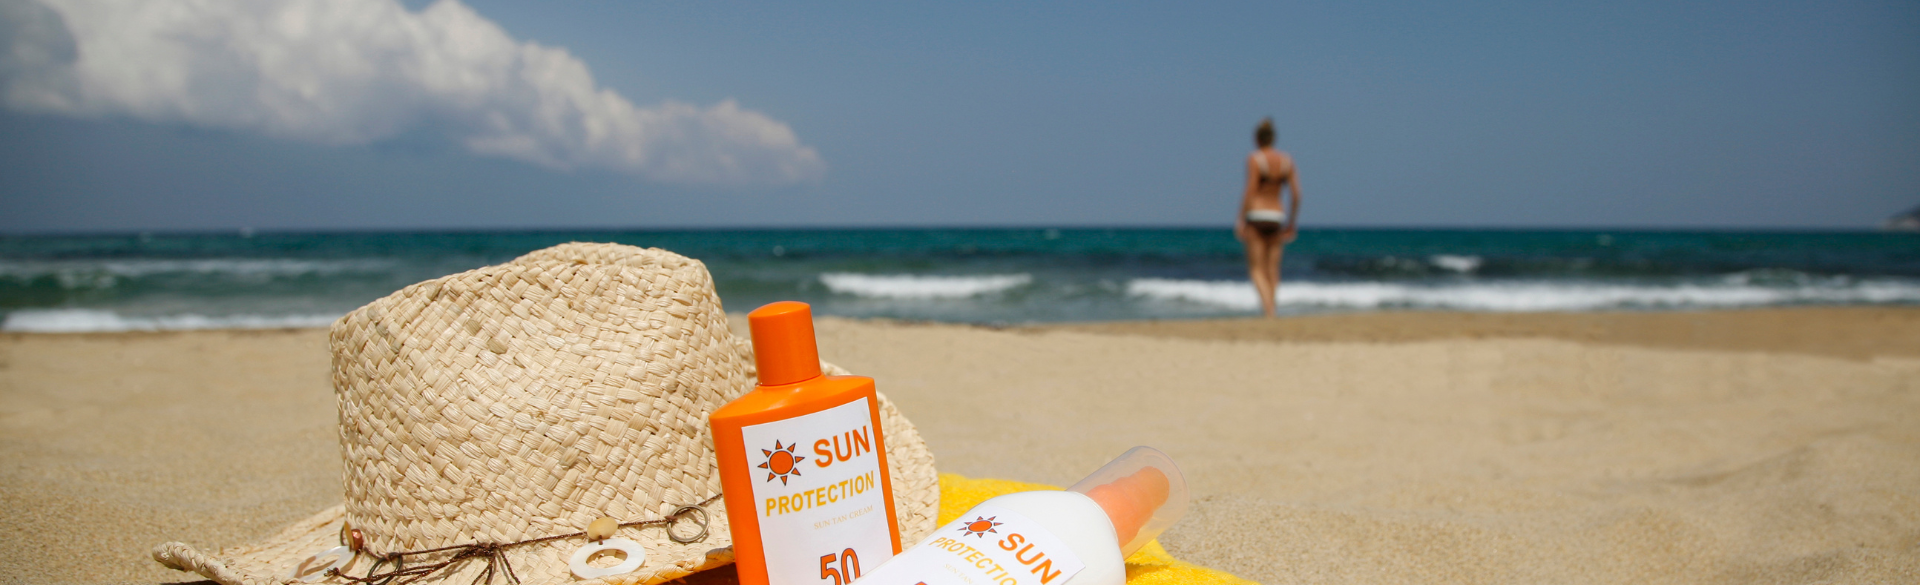 Sunscreen and sun hat on a beach with person in background